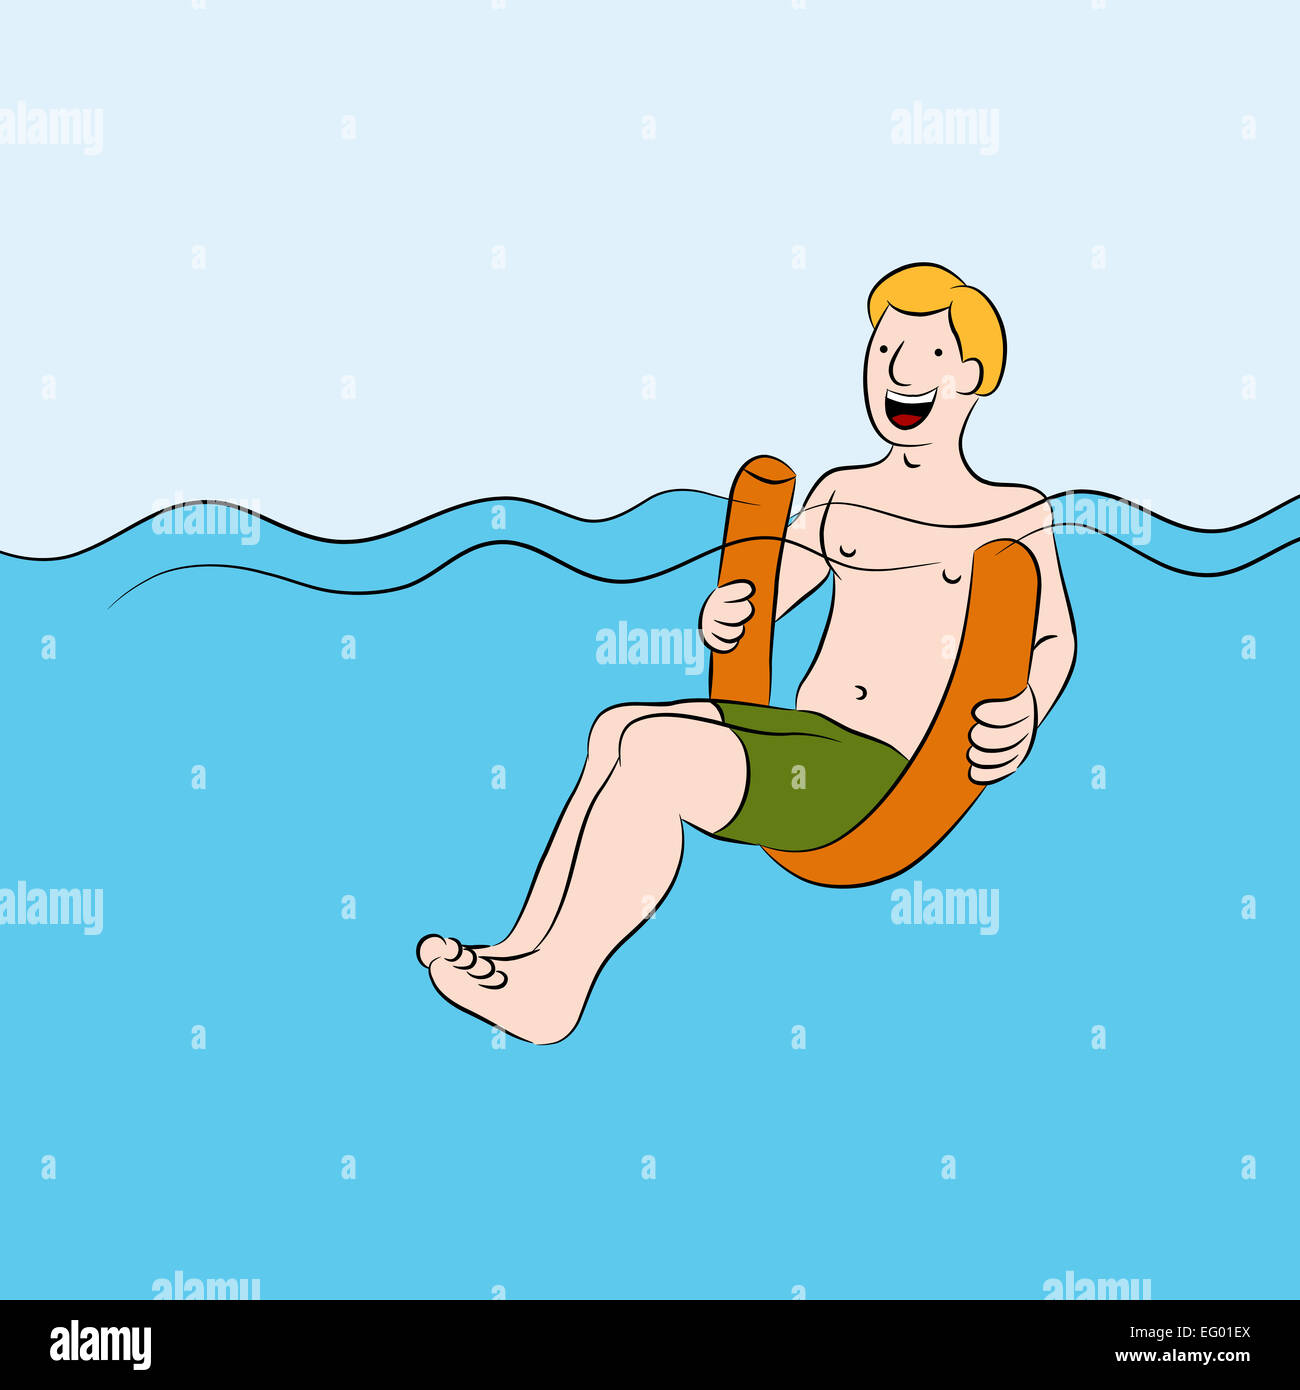 An image of a man floating in his swimming pool using a flotation noodle. Stock Photo